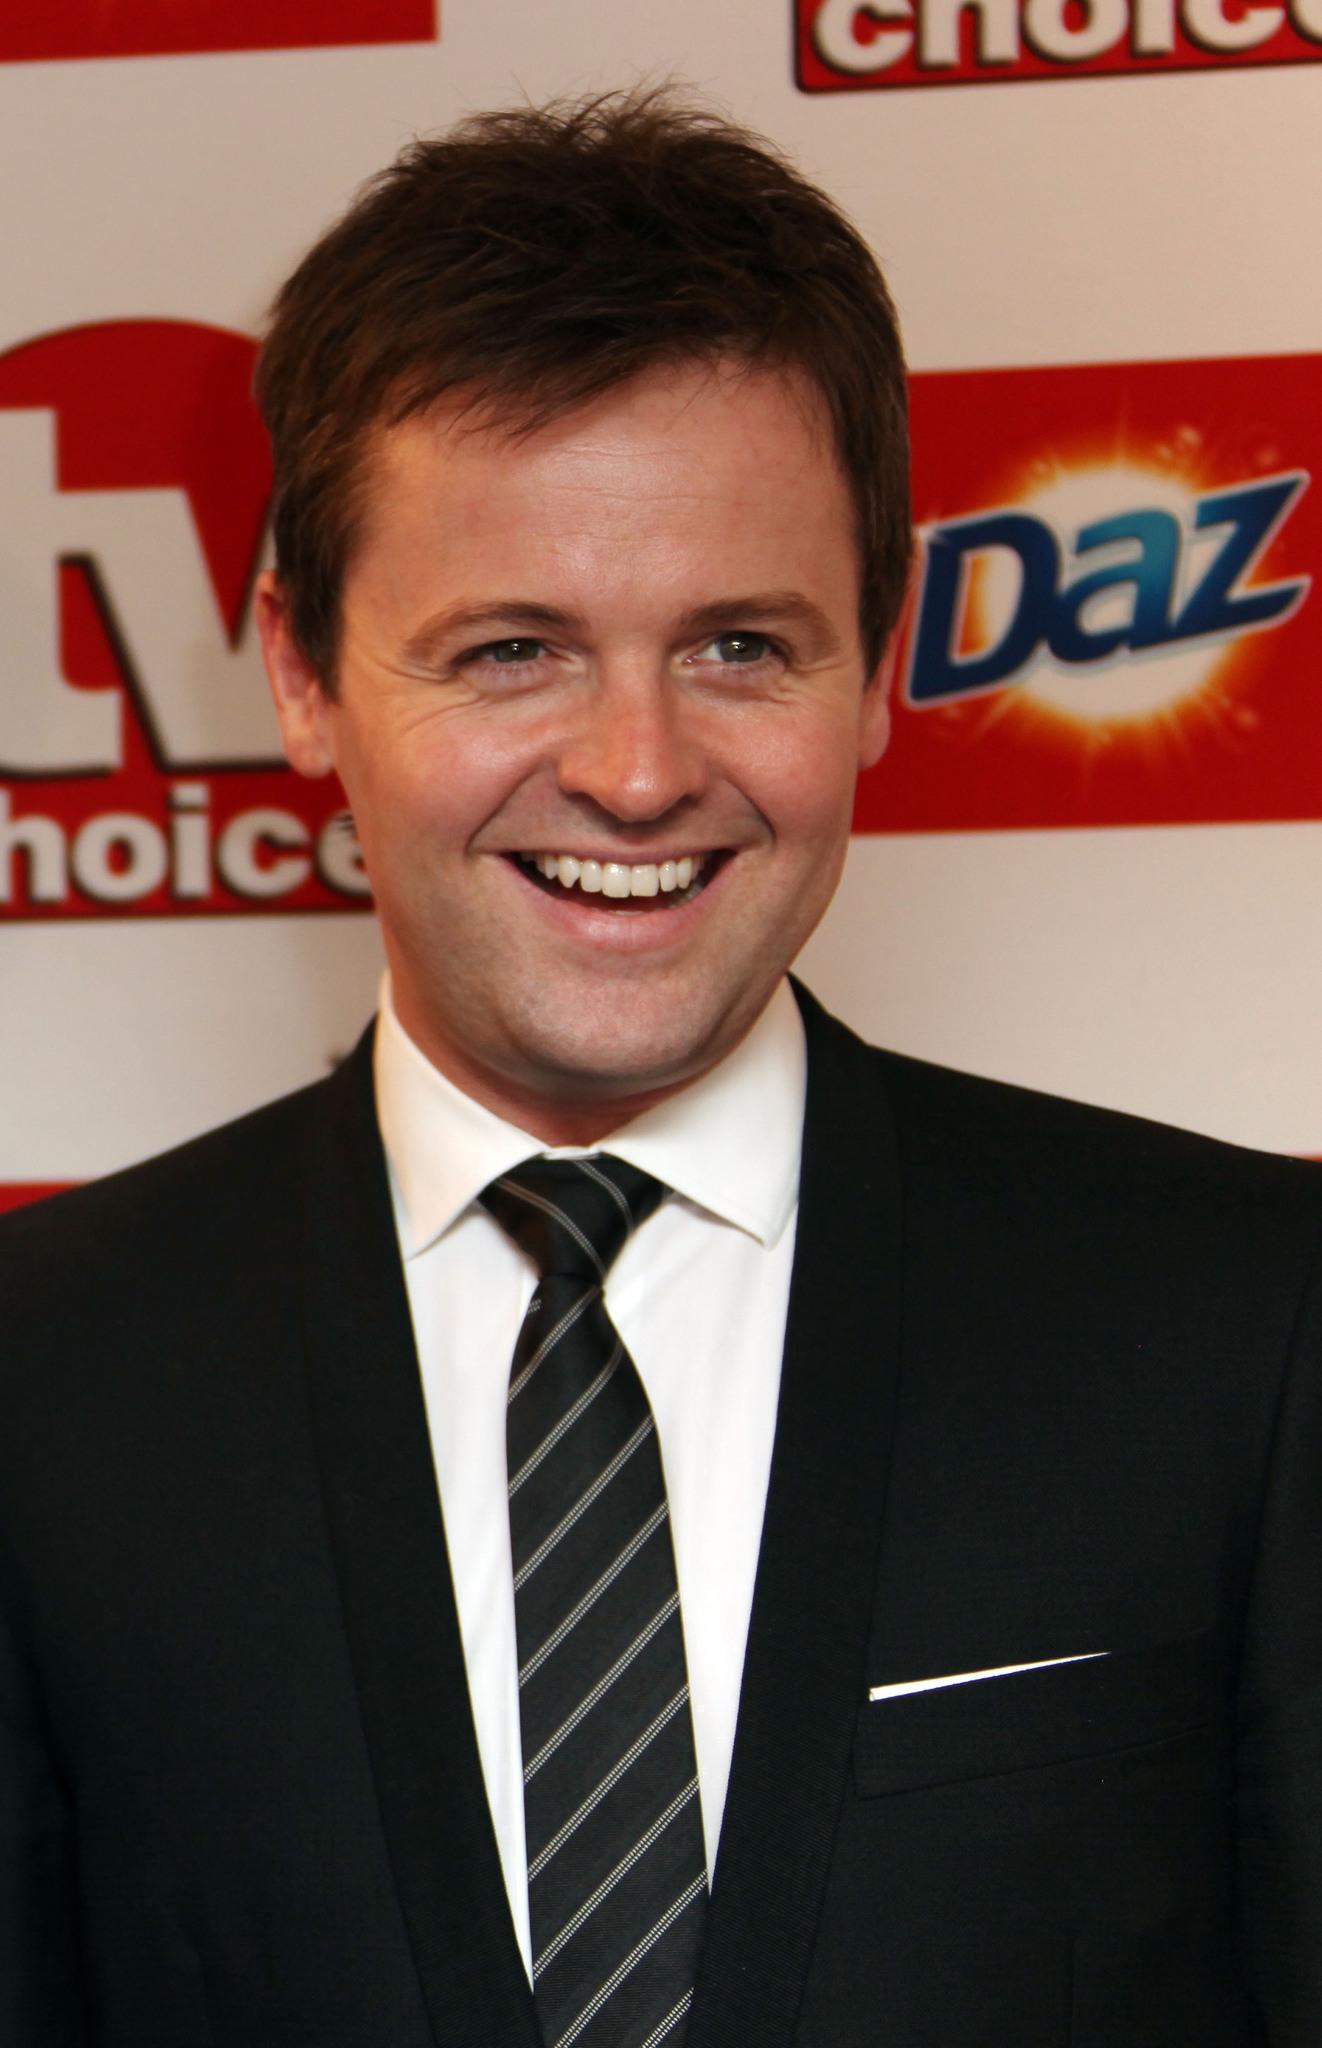 Declan Donnelly image